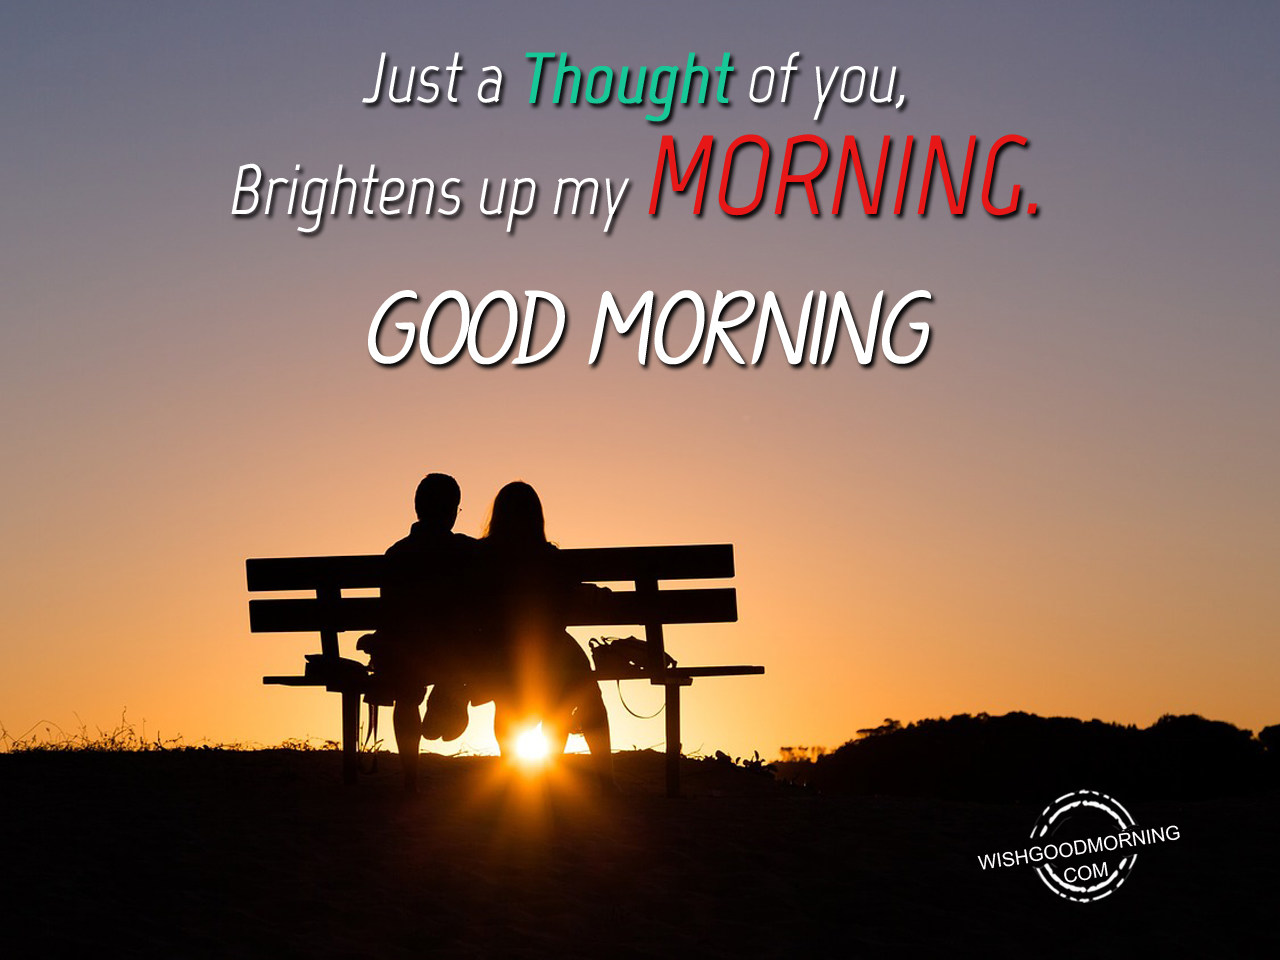 Just-a-thought-of-you - Good Morning Pictures – WishGoodMorning.com